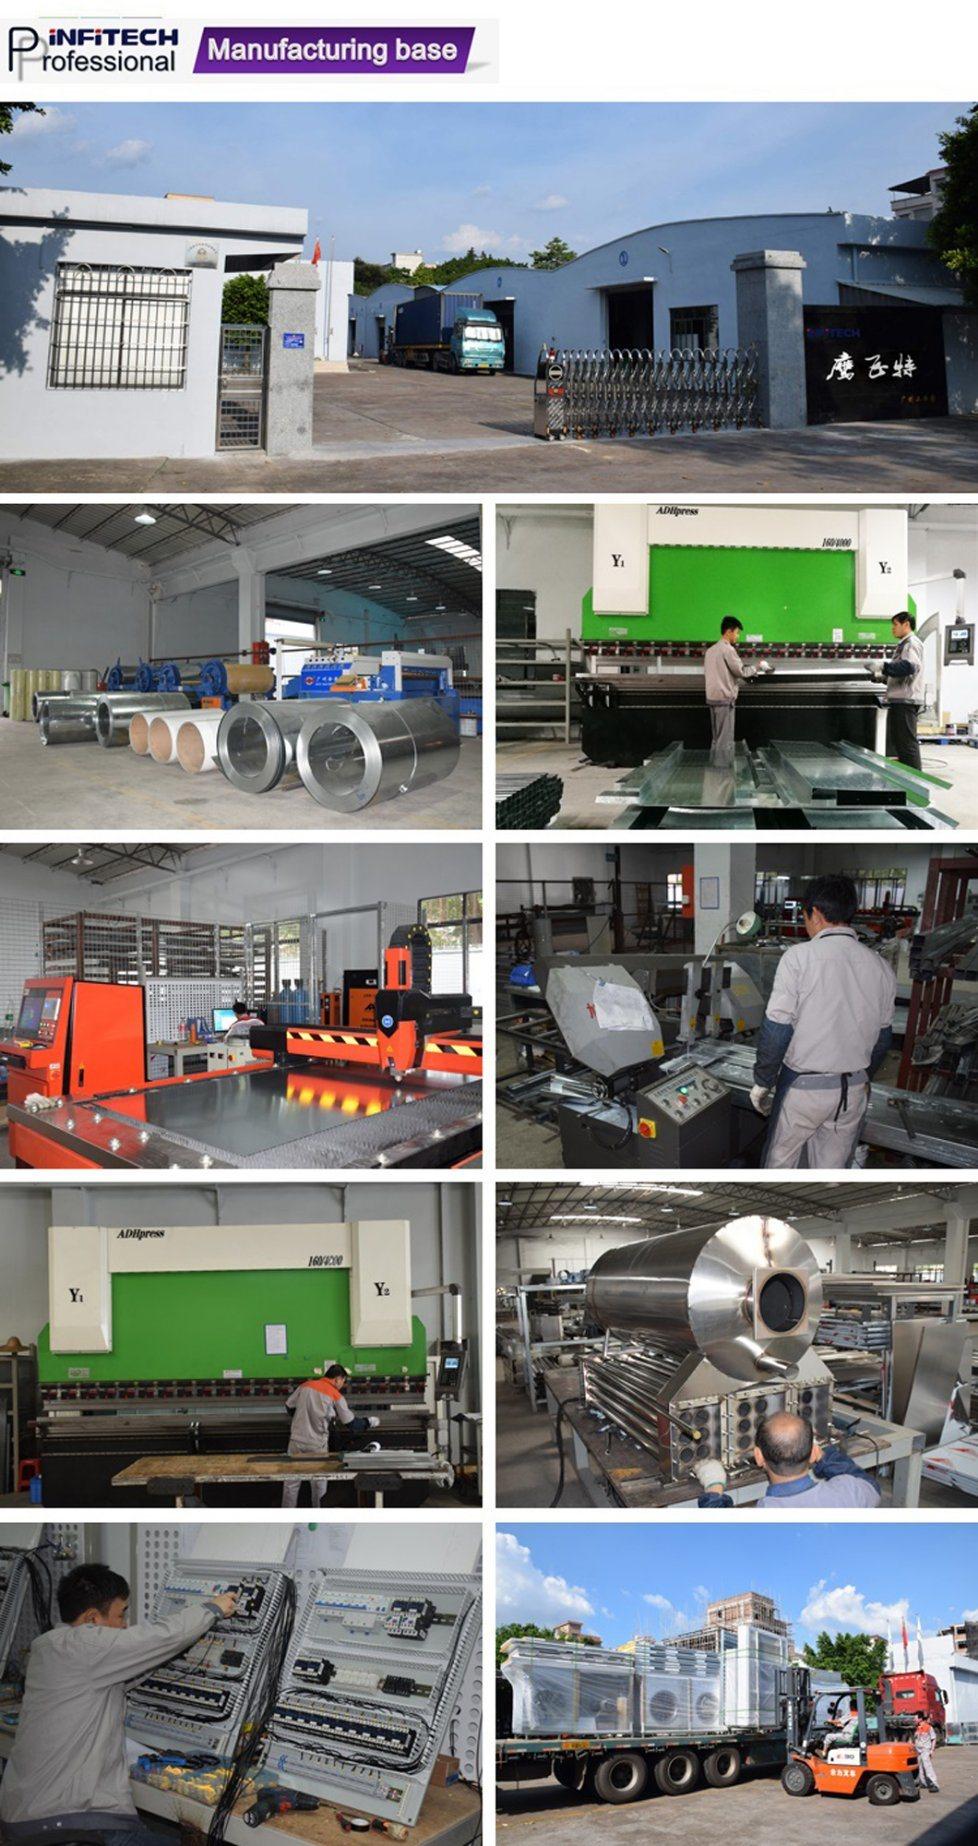 Painting Equipment/Spray Paint Booth/Spray Booth for Industry Painting